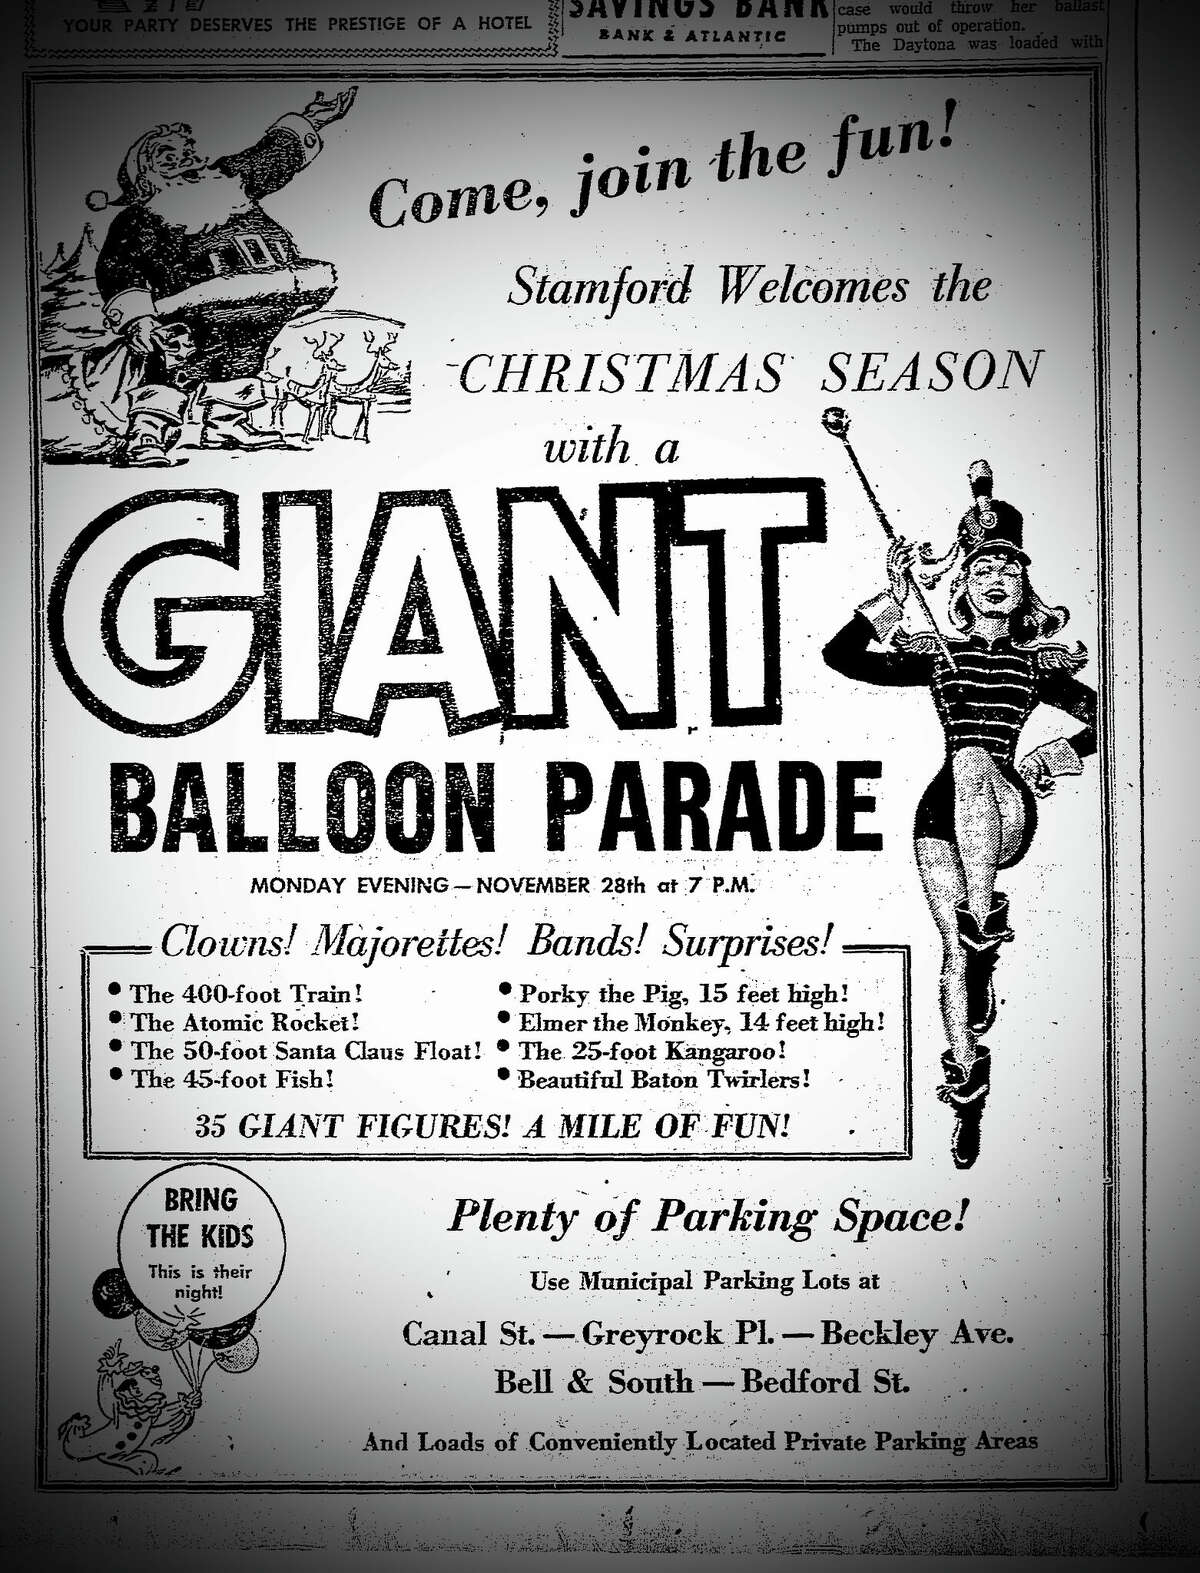 An advertisement for the Stamford Holiday Parade in the Stamford Advocate on November 21, 1955.